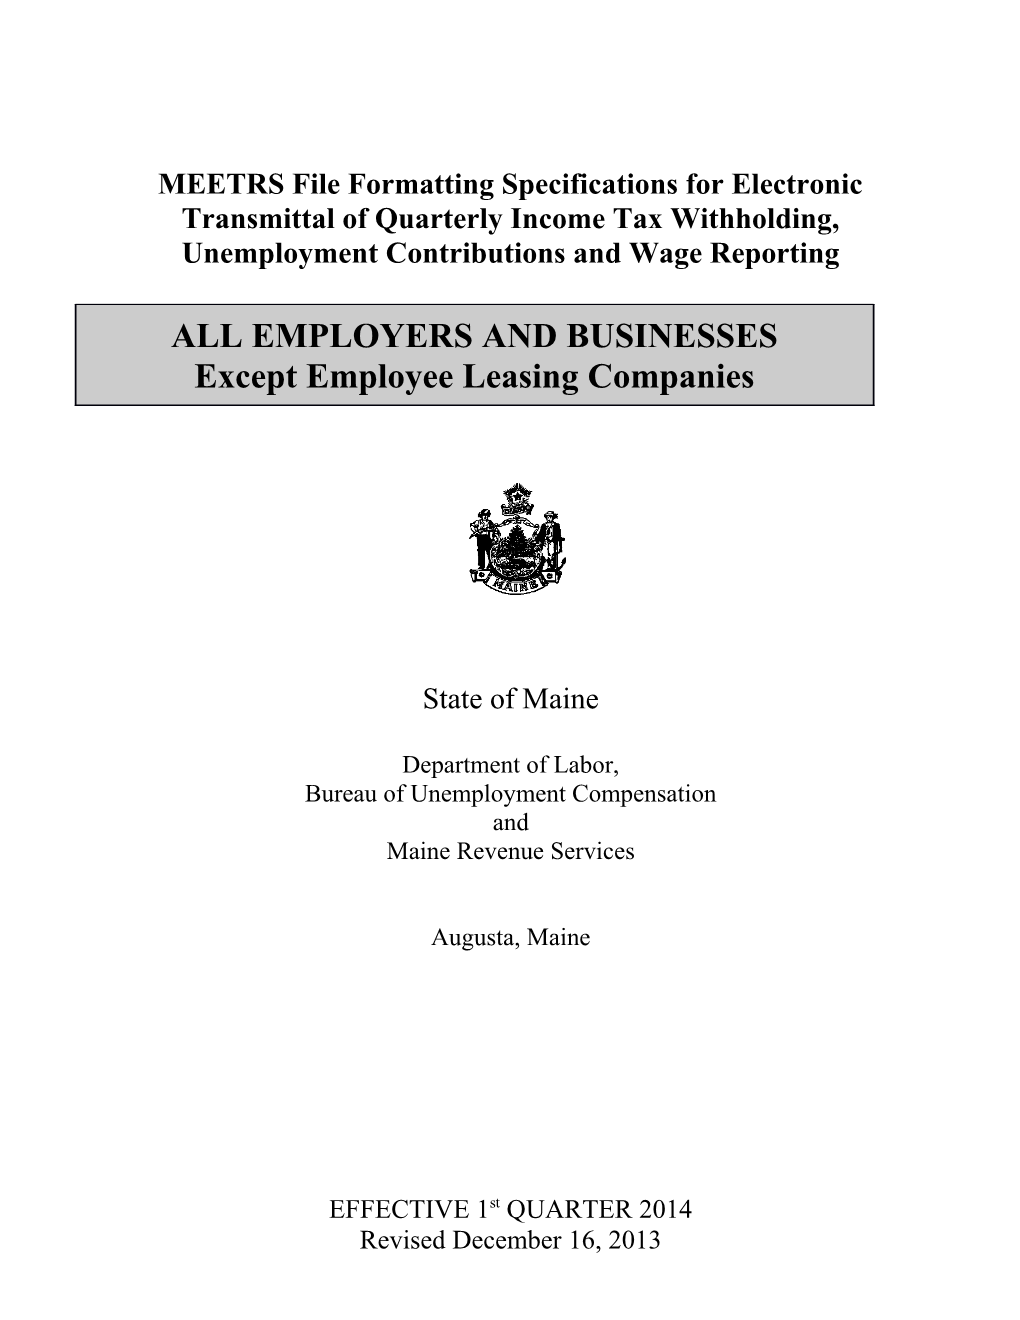 Maine ICESA File Formatting Specifications for Electronic Transmittal of Income Tax Withholding